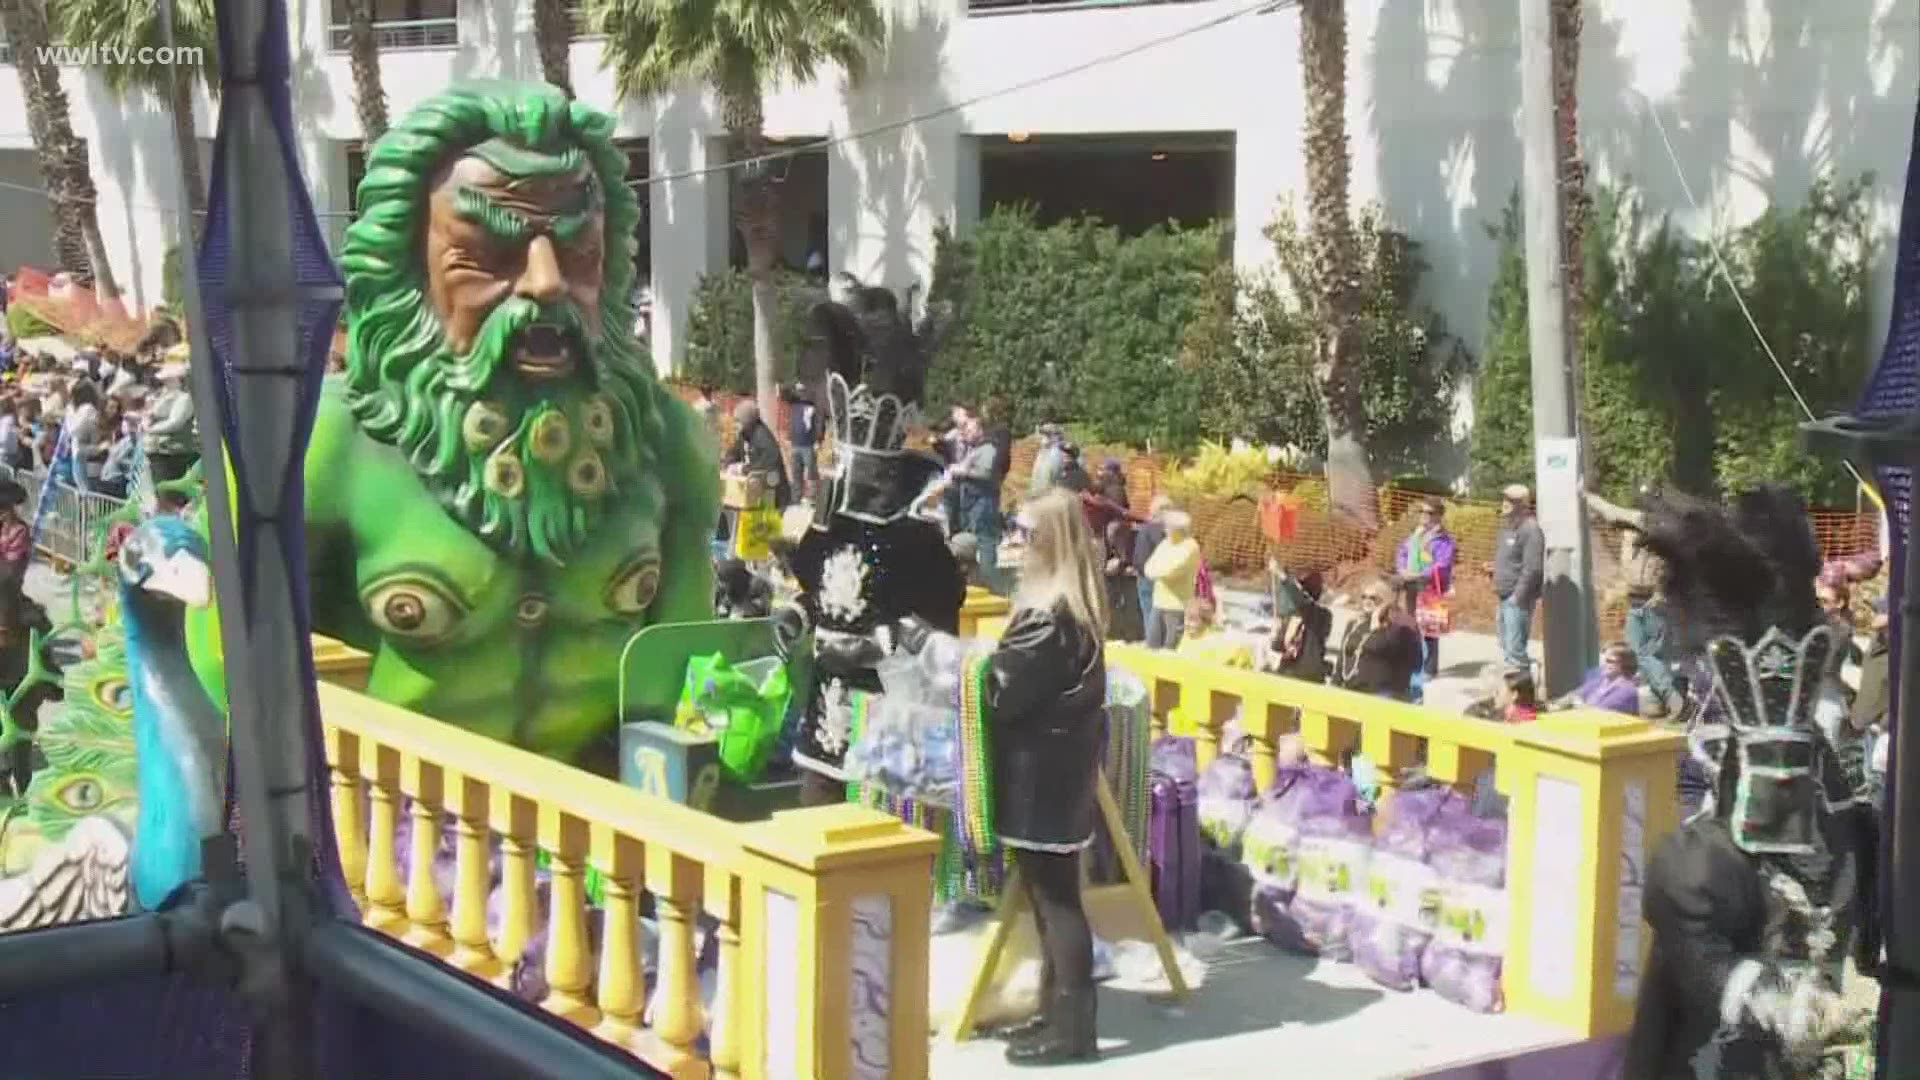 Jefferson Parish could parade in May 2021p